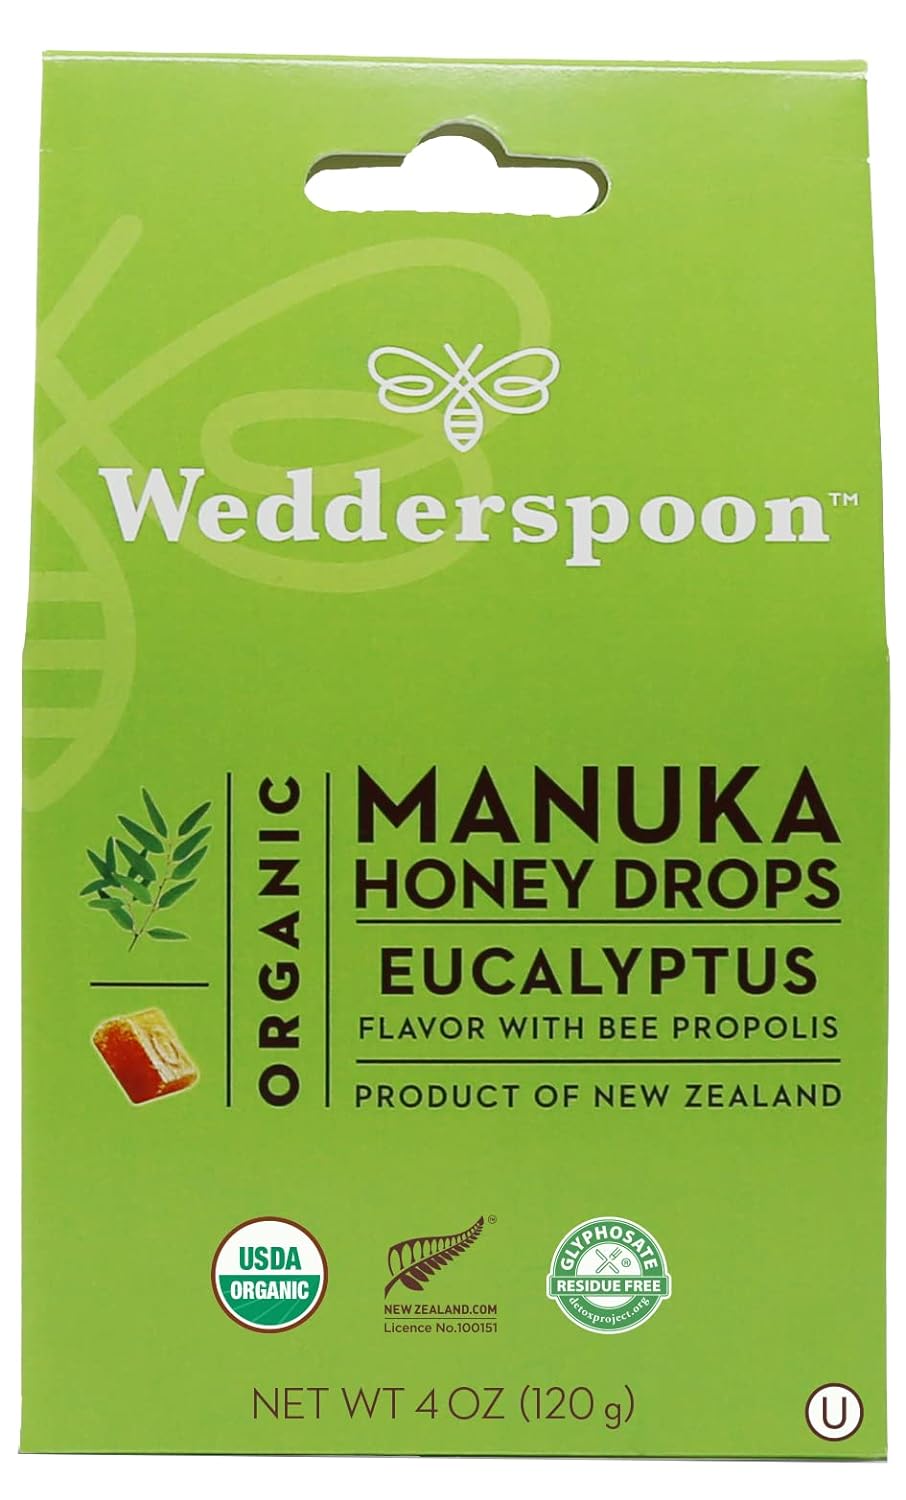 Wedderspoon Organic Manuka Honey Drops, Eucalyptus & Bee Propolis, 20 Count (4oz) (Pack of 1)| Genuine New Zealand Honey | Perfect Remedy For Dry Throats